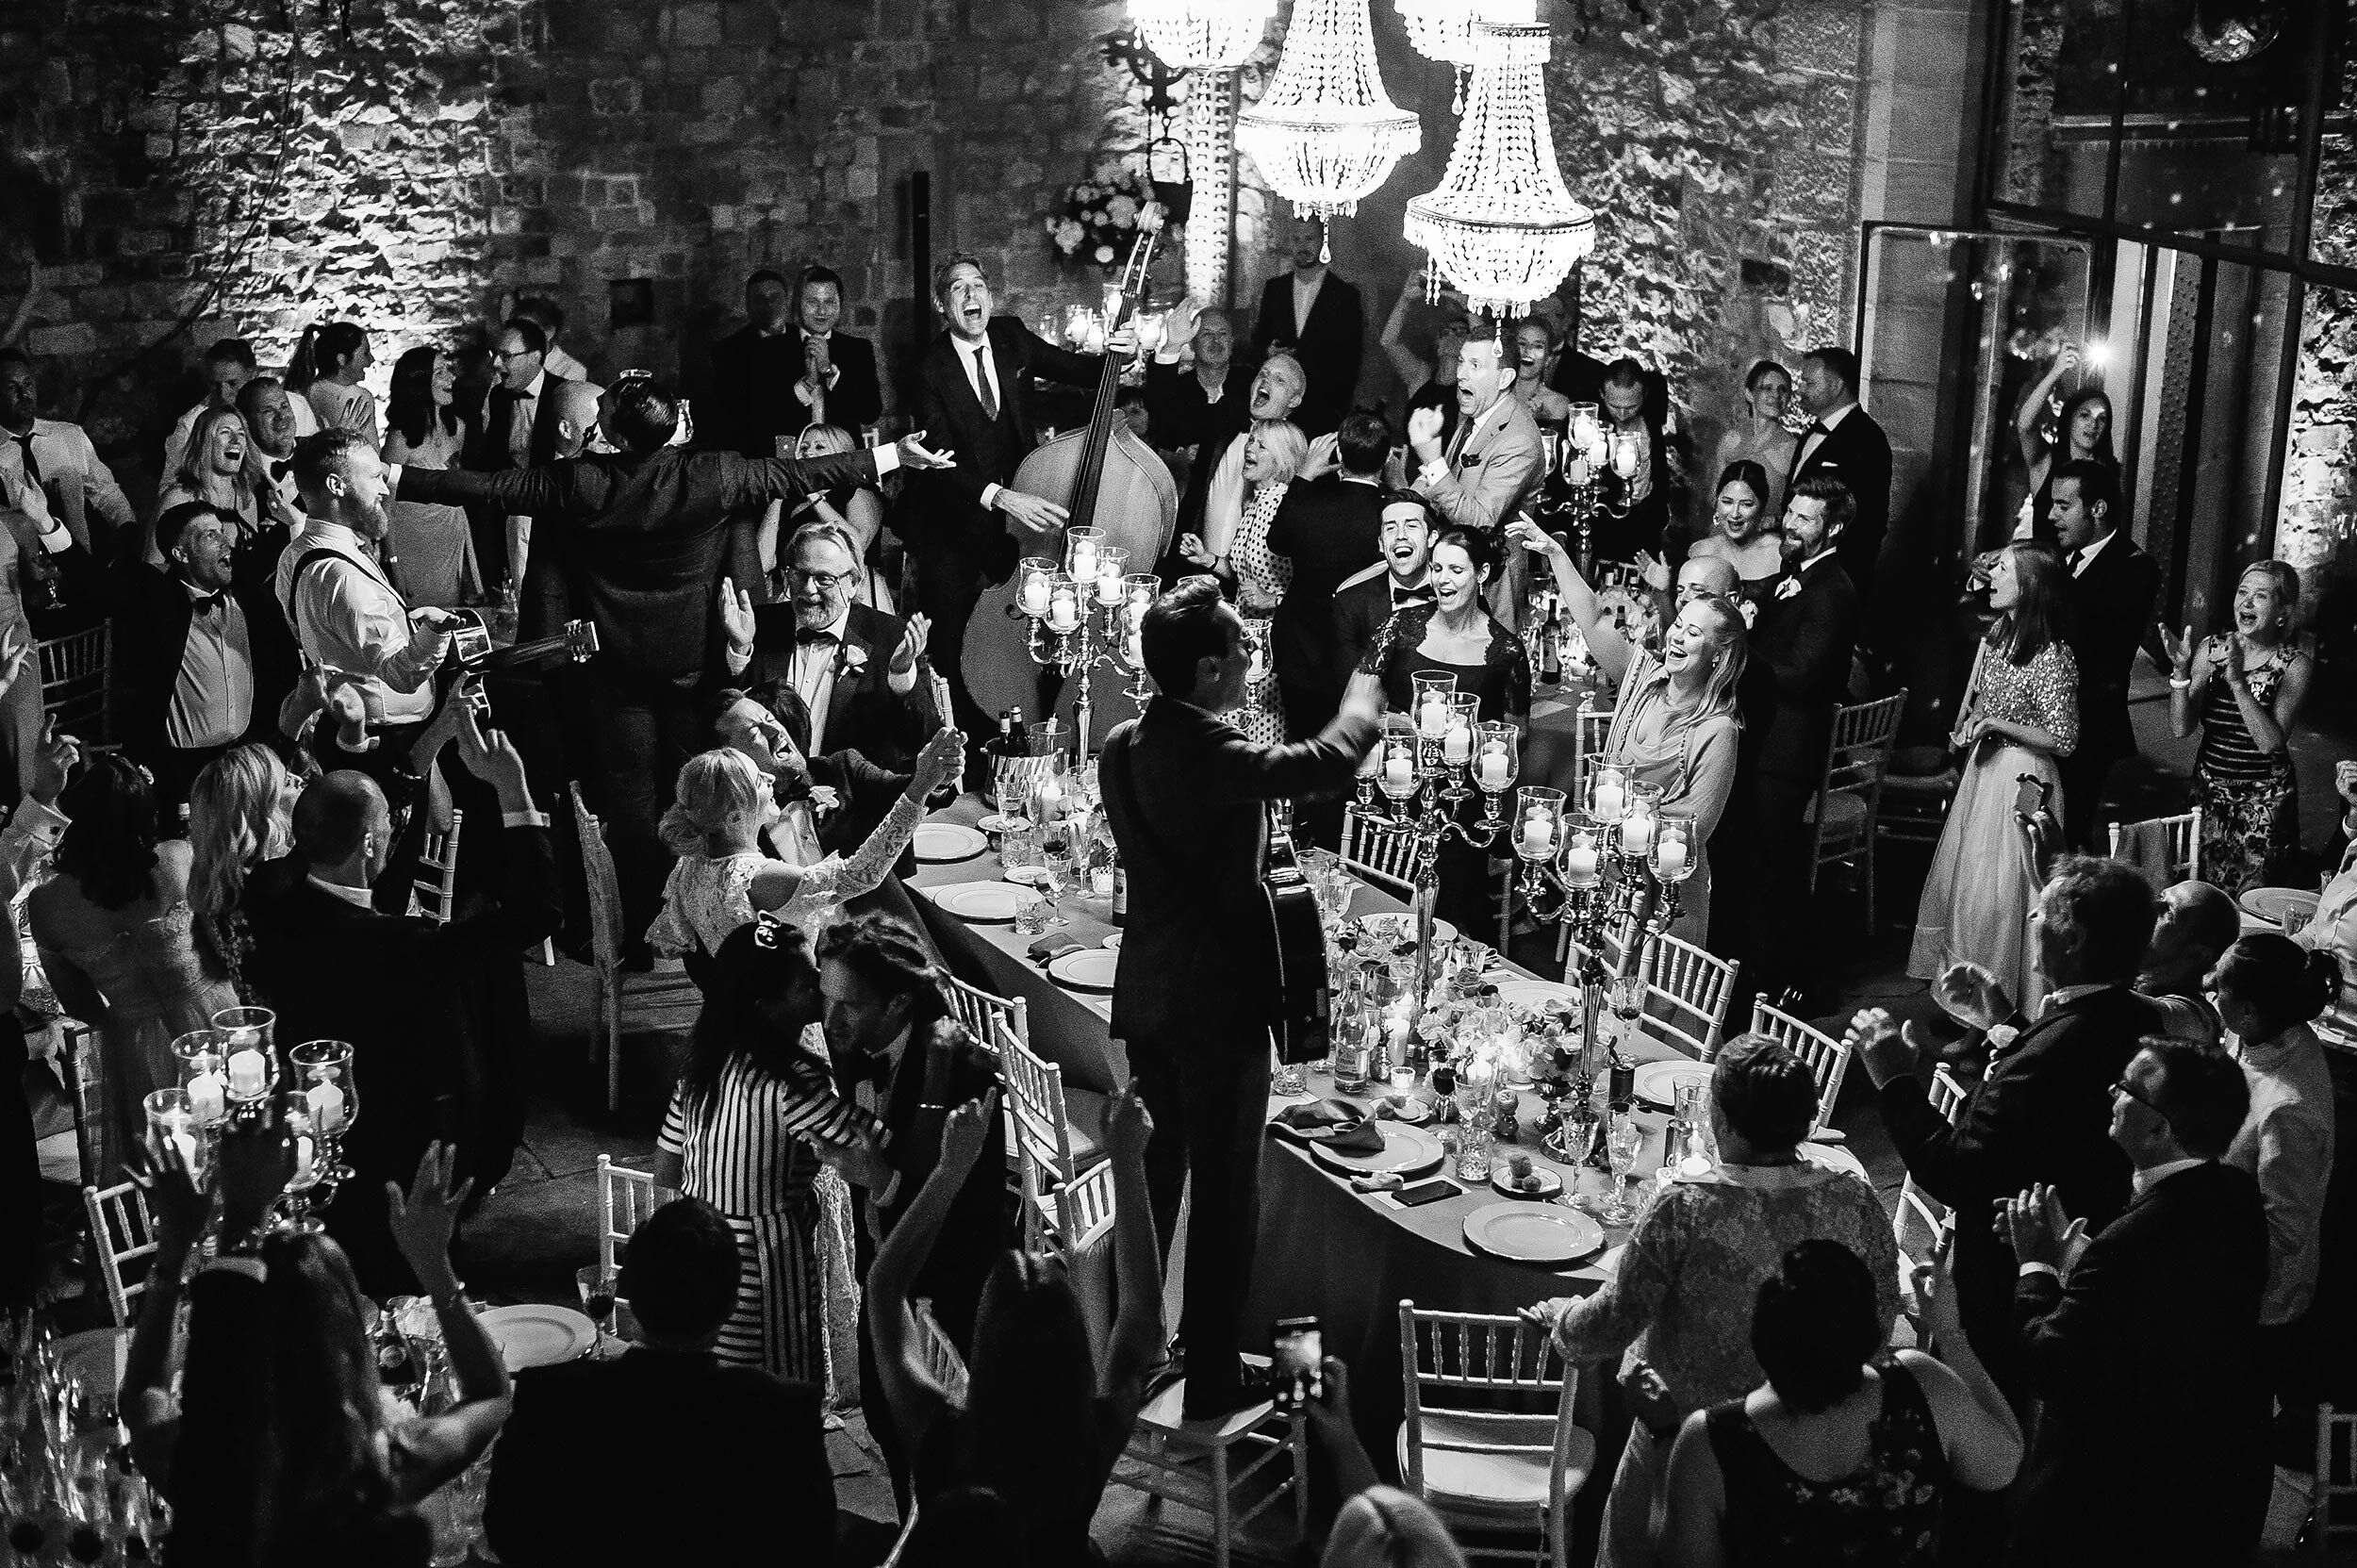 wedding-reception-dancing-live-music-band-the-london-essentials-black-and-white-candid-photographer-Alessandro-Avenali.jpg